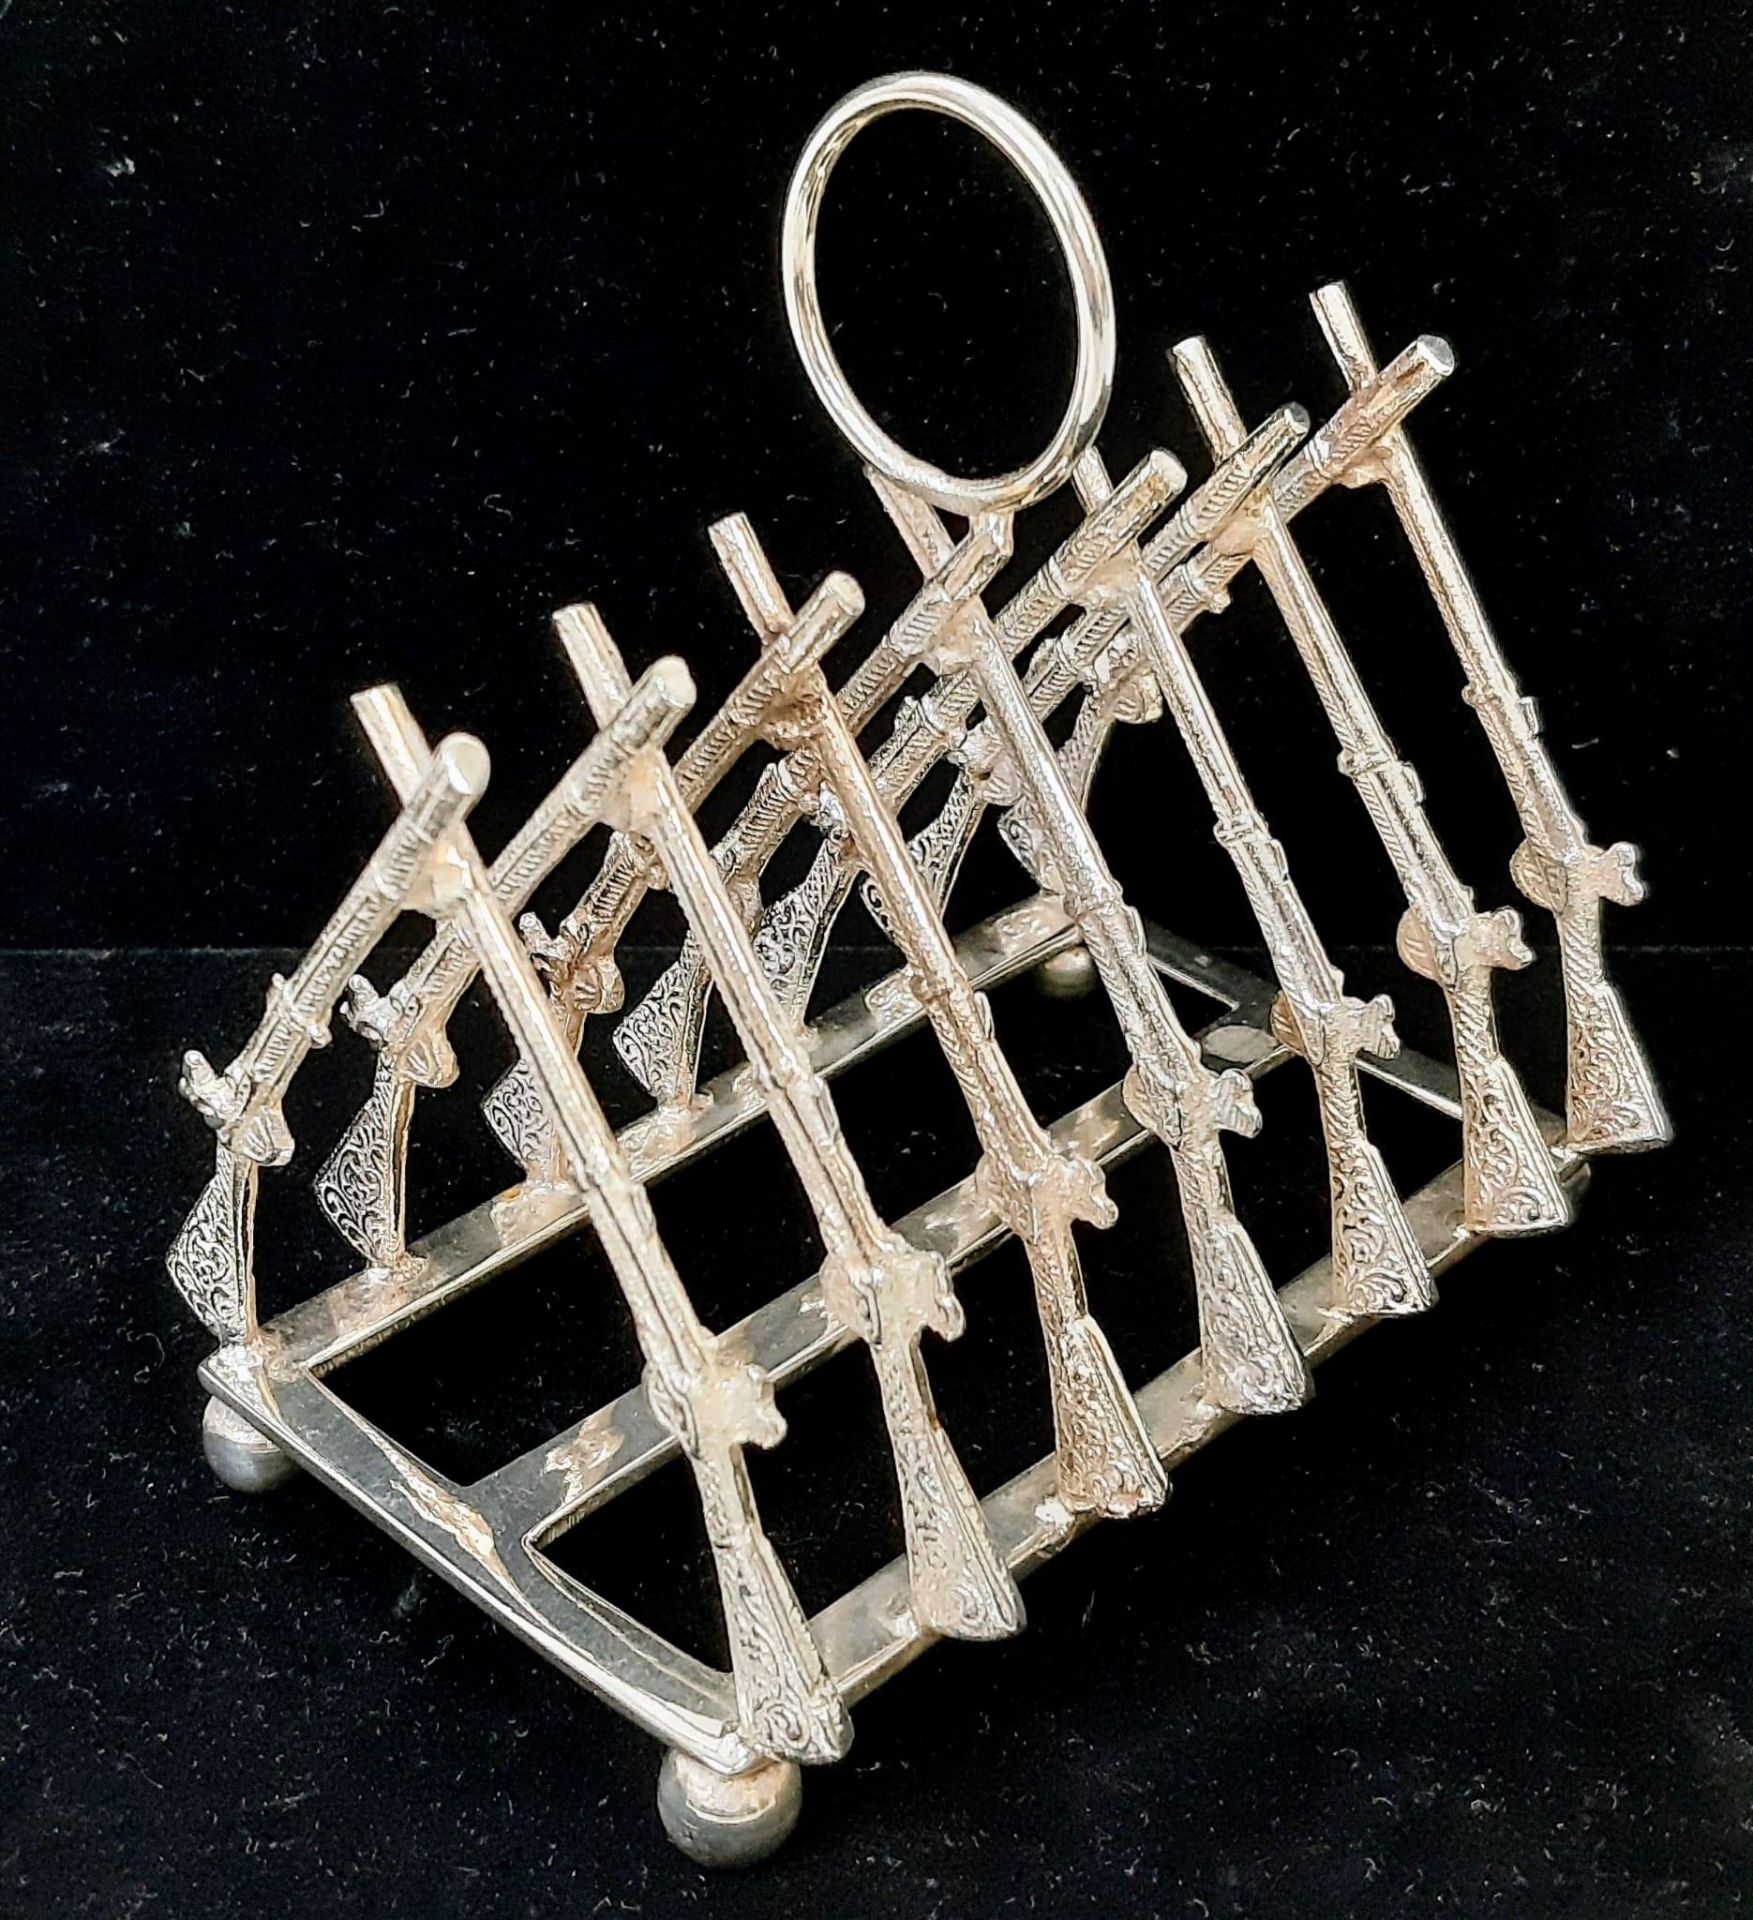 A Silver Plated ‘Rifle Rack’ Toast Rack as used in Military Clubs and Regimental Mess’. 11cm Wide.